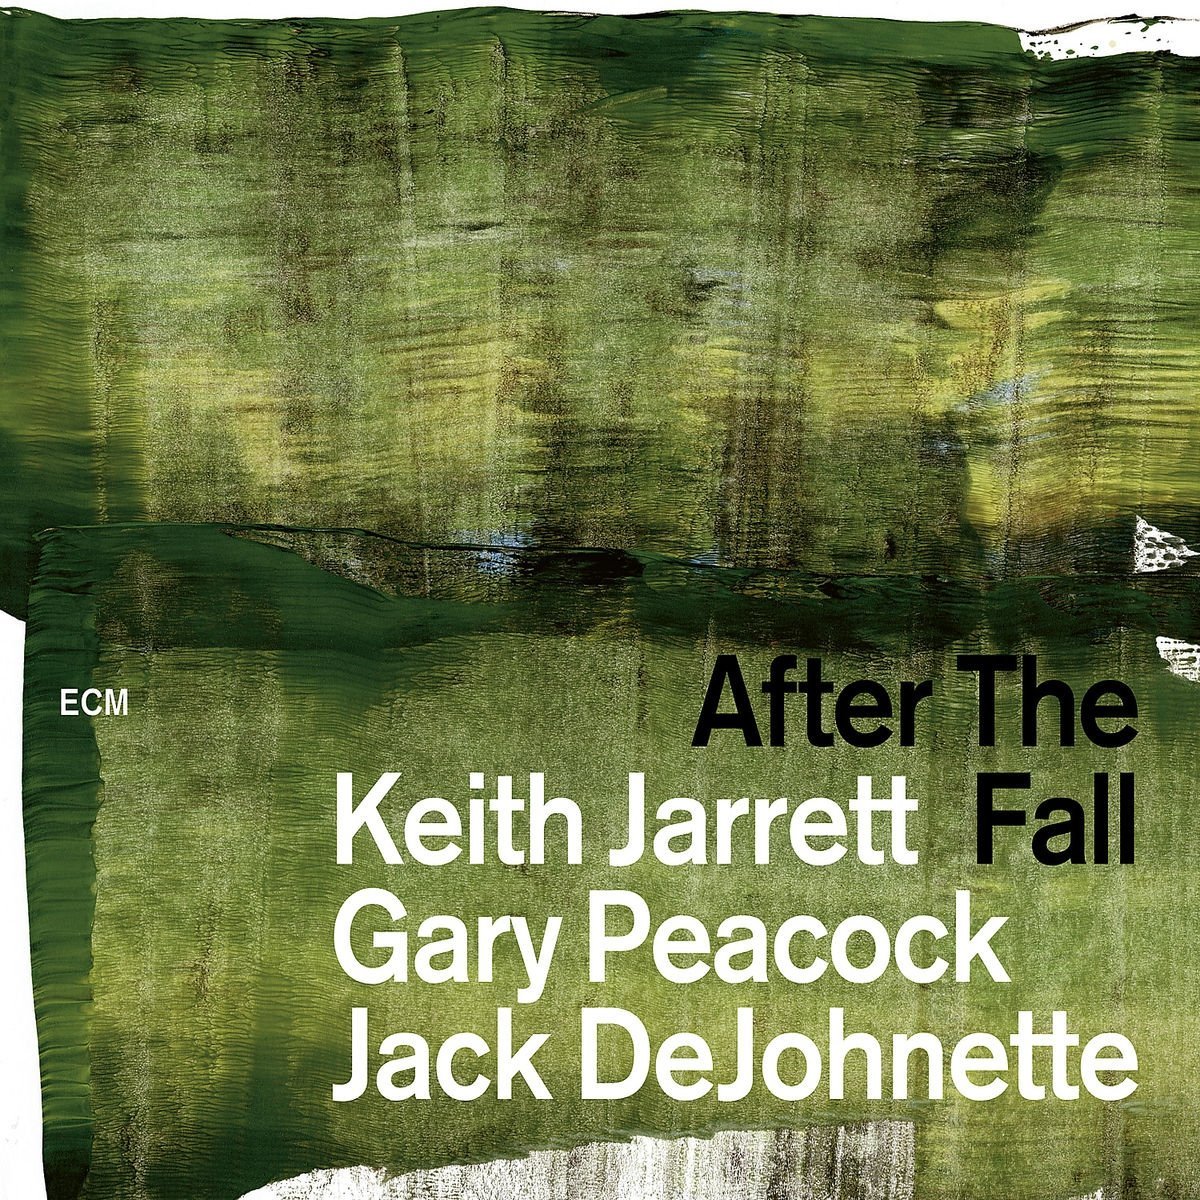 After The Fall | Keith Jarrett, Gary Peacock, Jack DeJohnette image